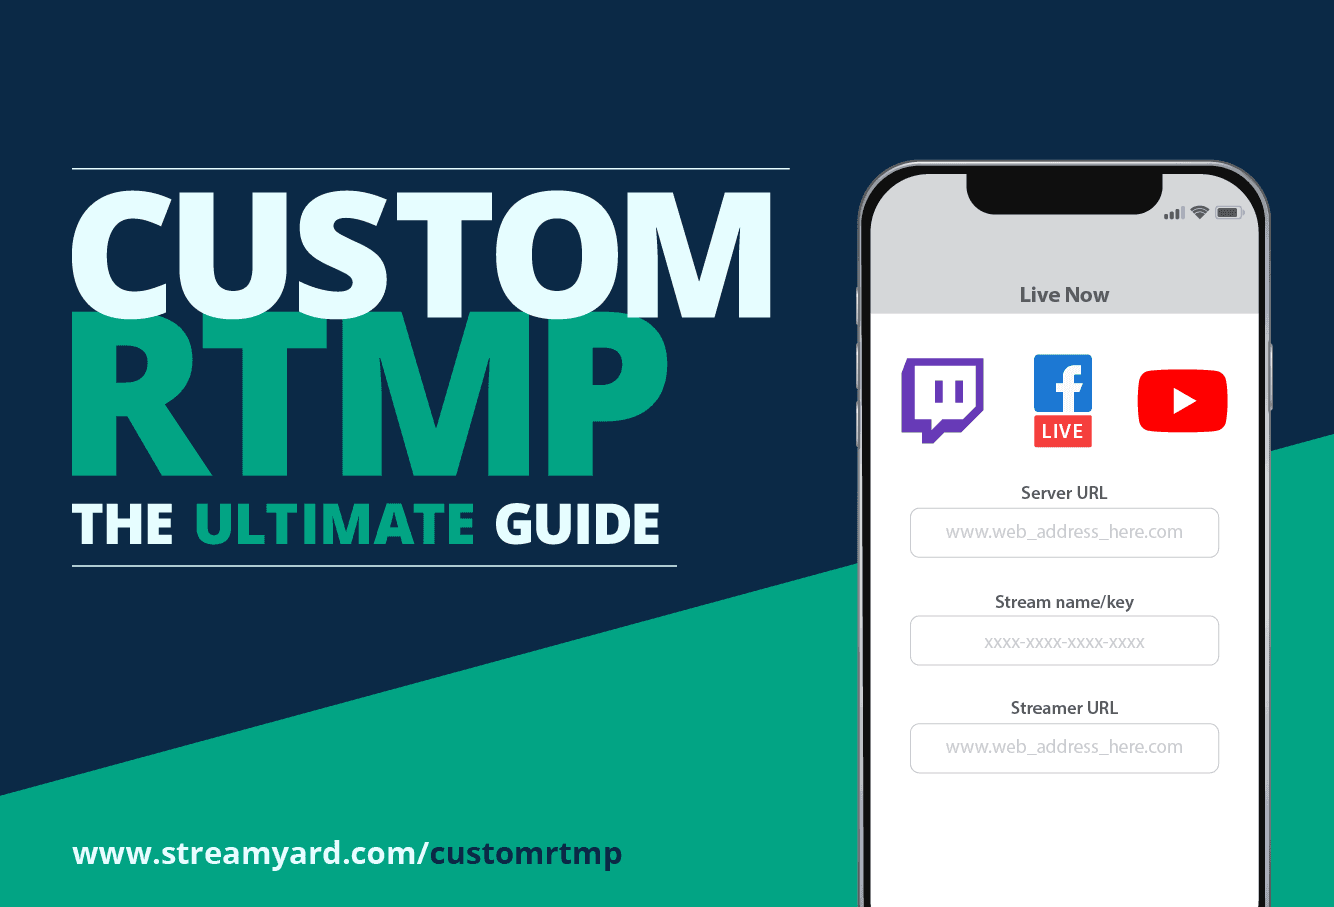 Learn how to use custom rtmp live streaming to live stream to other destinations beyond Facebook Live, YouTube Live, LinkedIn Live and more.